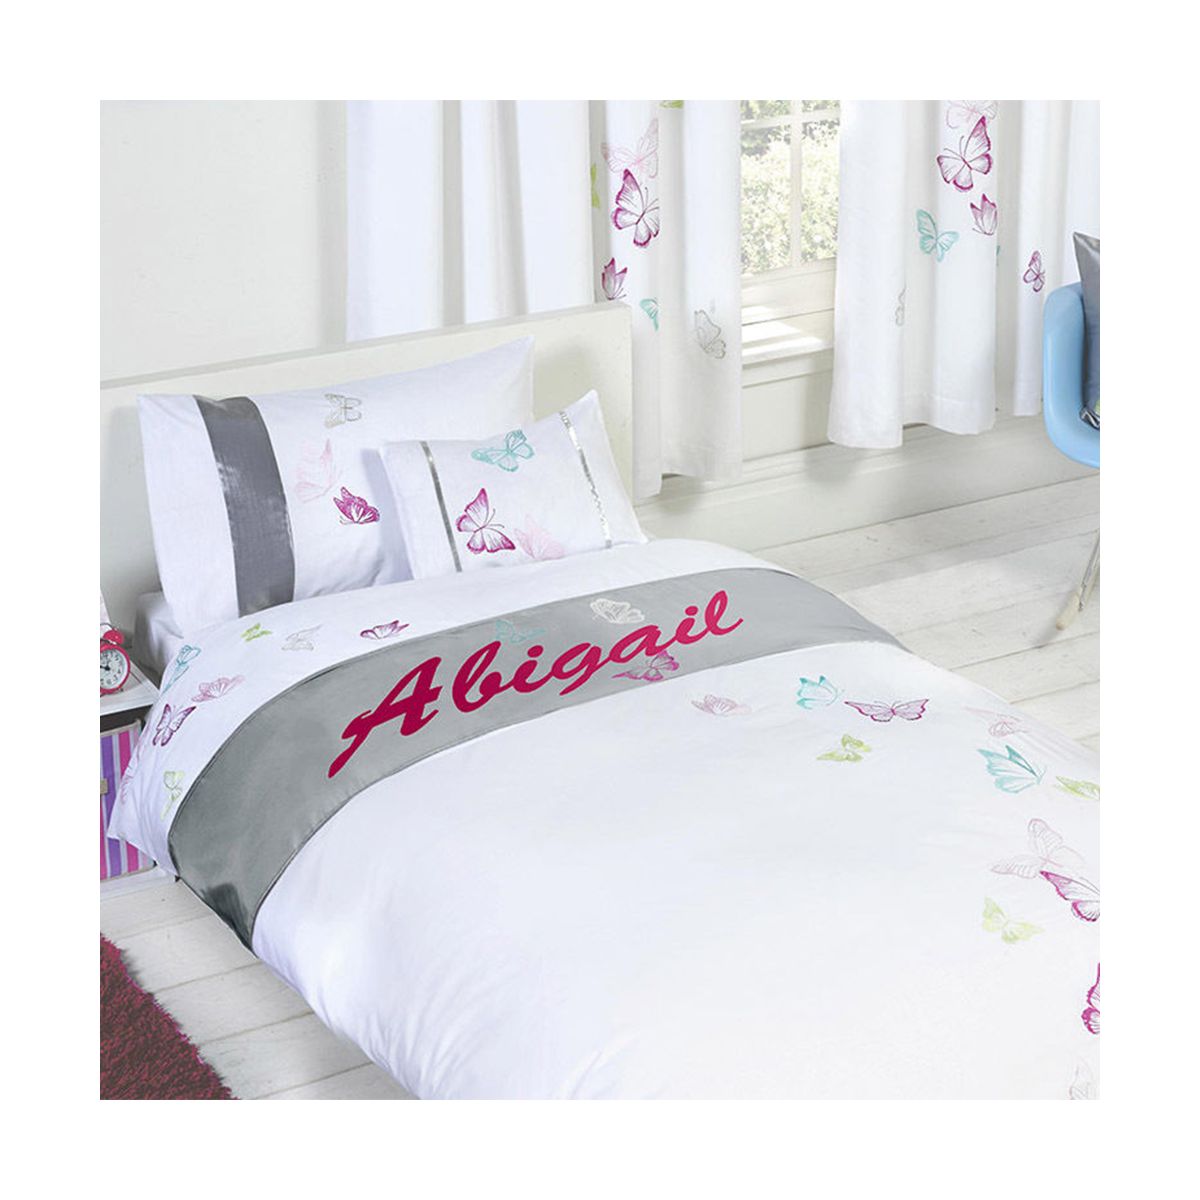 Abigail - Personalised Butterfly Duvet Cover Set